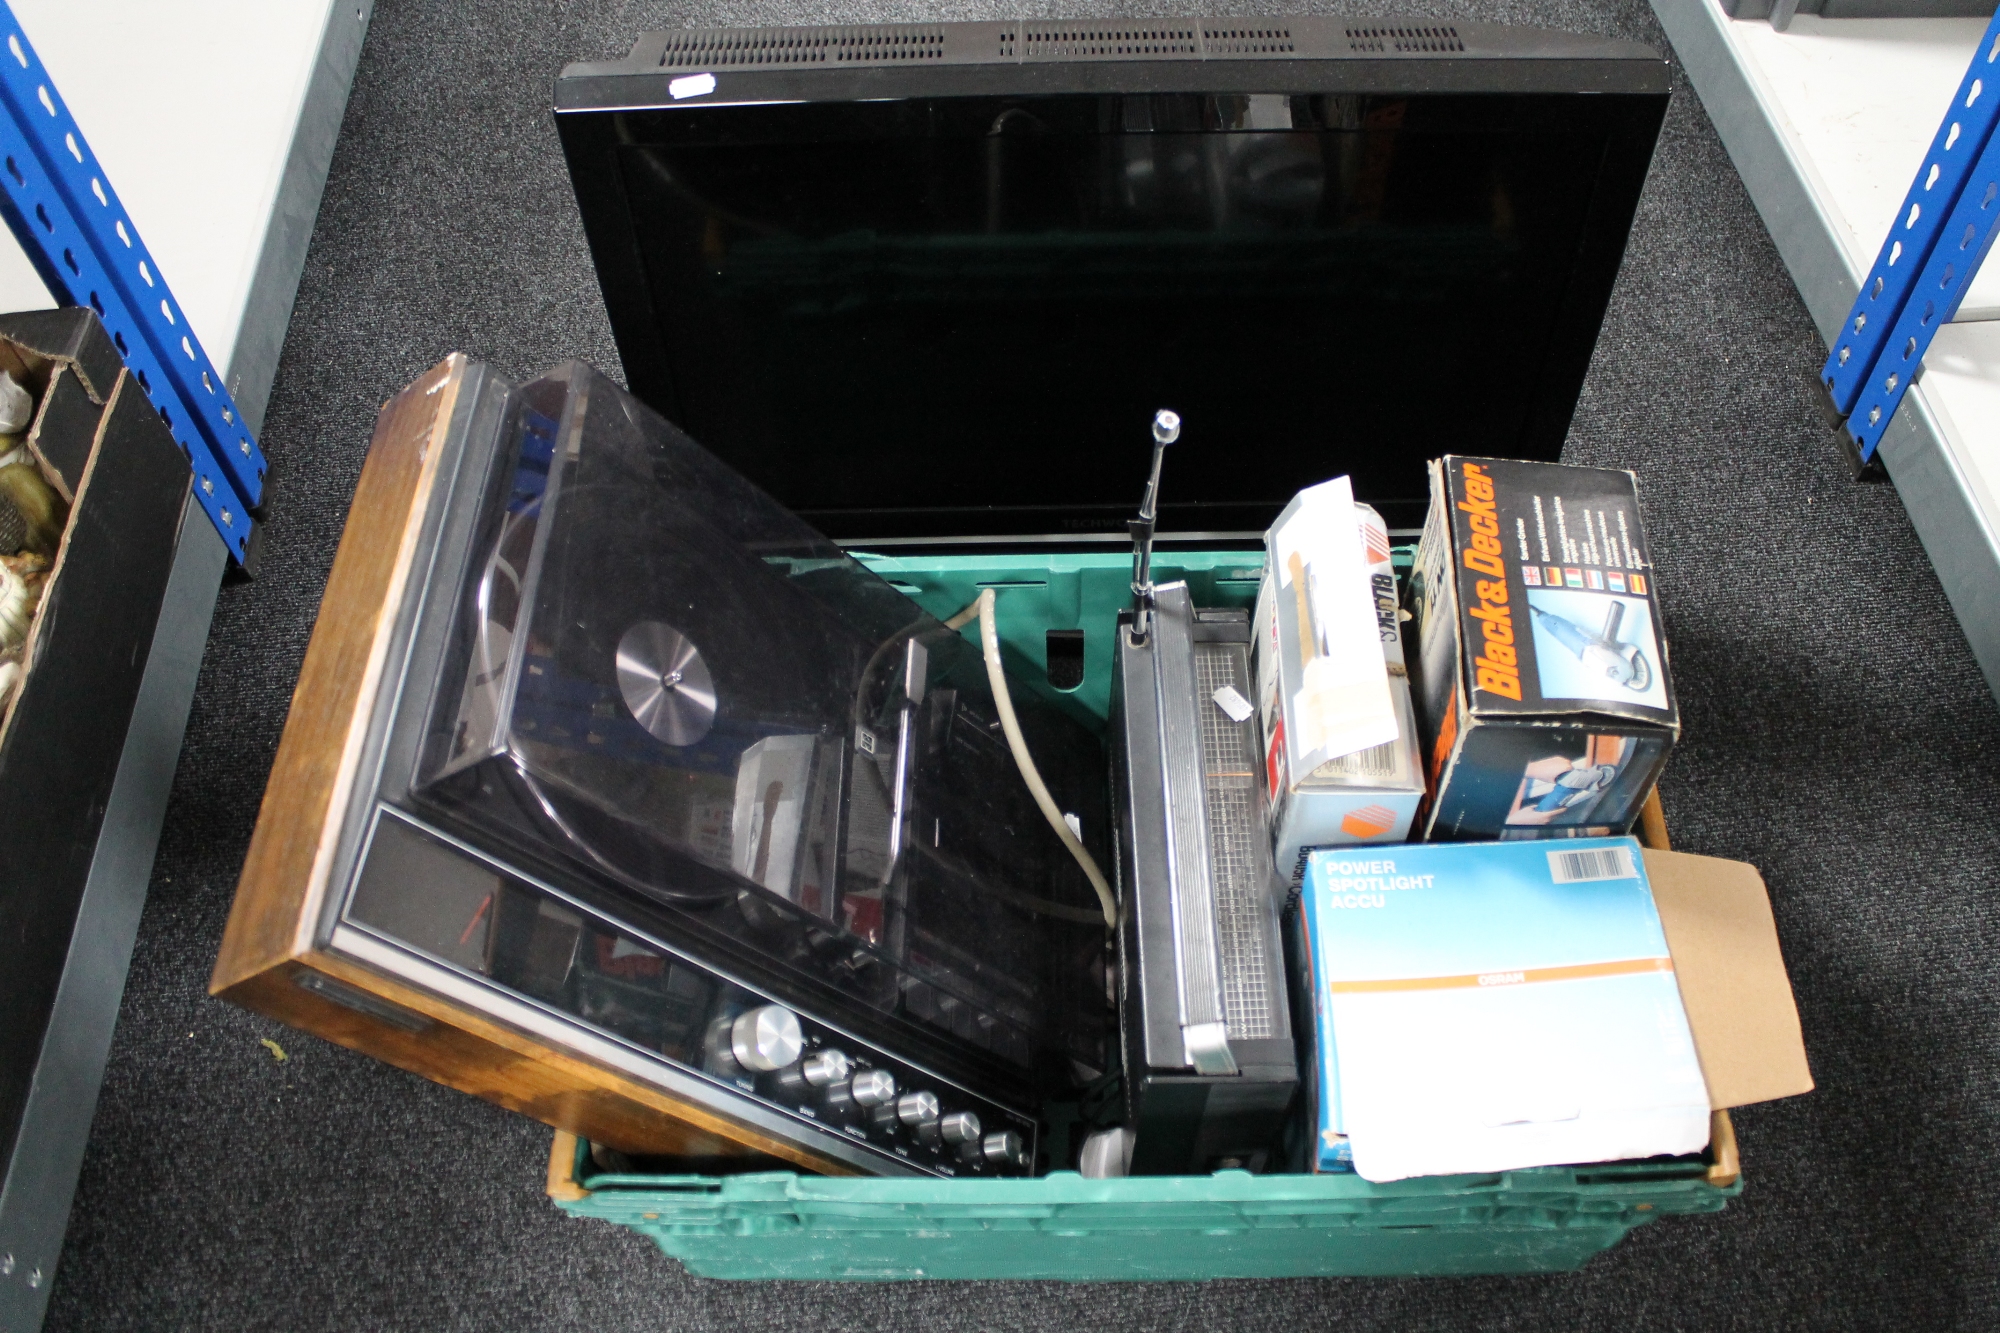 A crate of National Panasonic stereo, Tandy astronaut radio, spot light, black and decker drill,